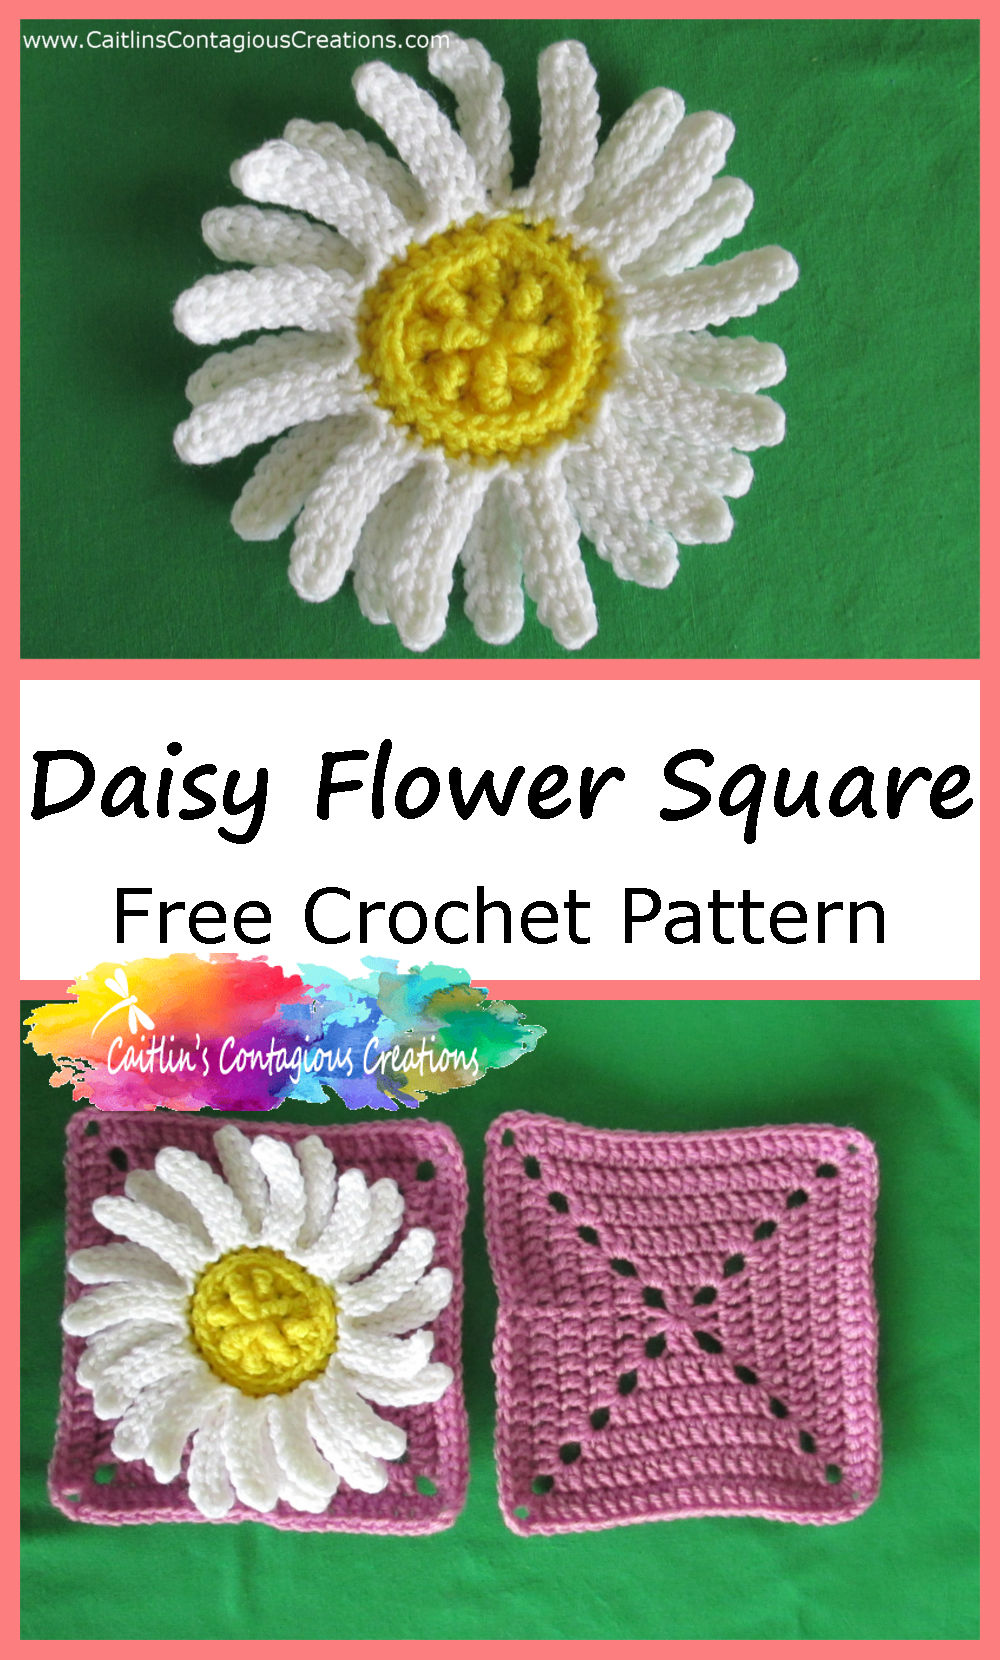 Finished daisy on green background with text overlay Daisy Flower Square Free Crochet Pattern and Caitlin's Contagious Creations logo